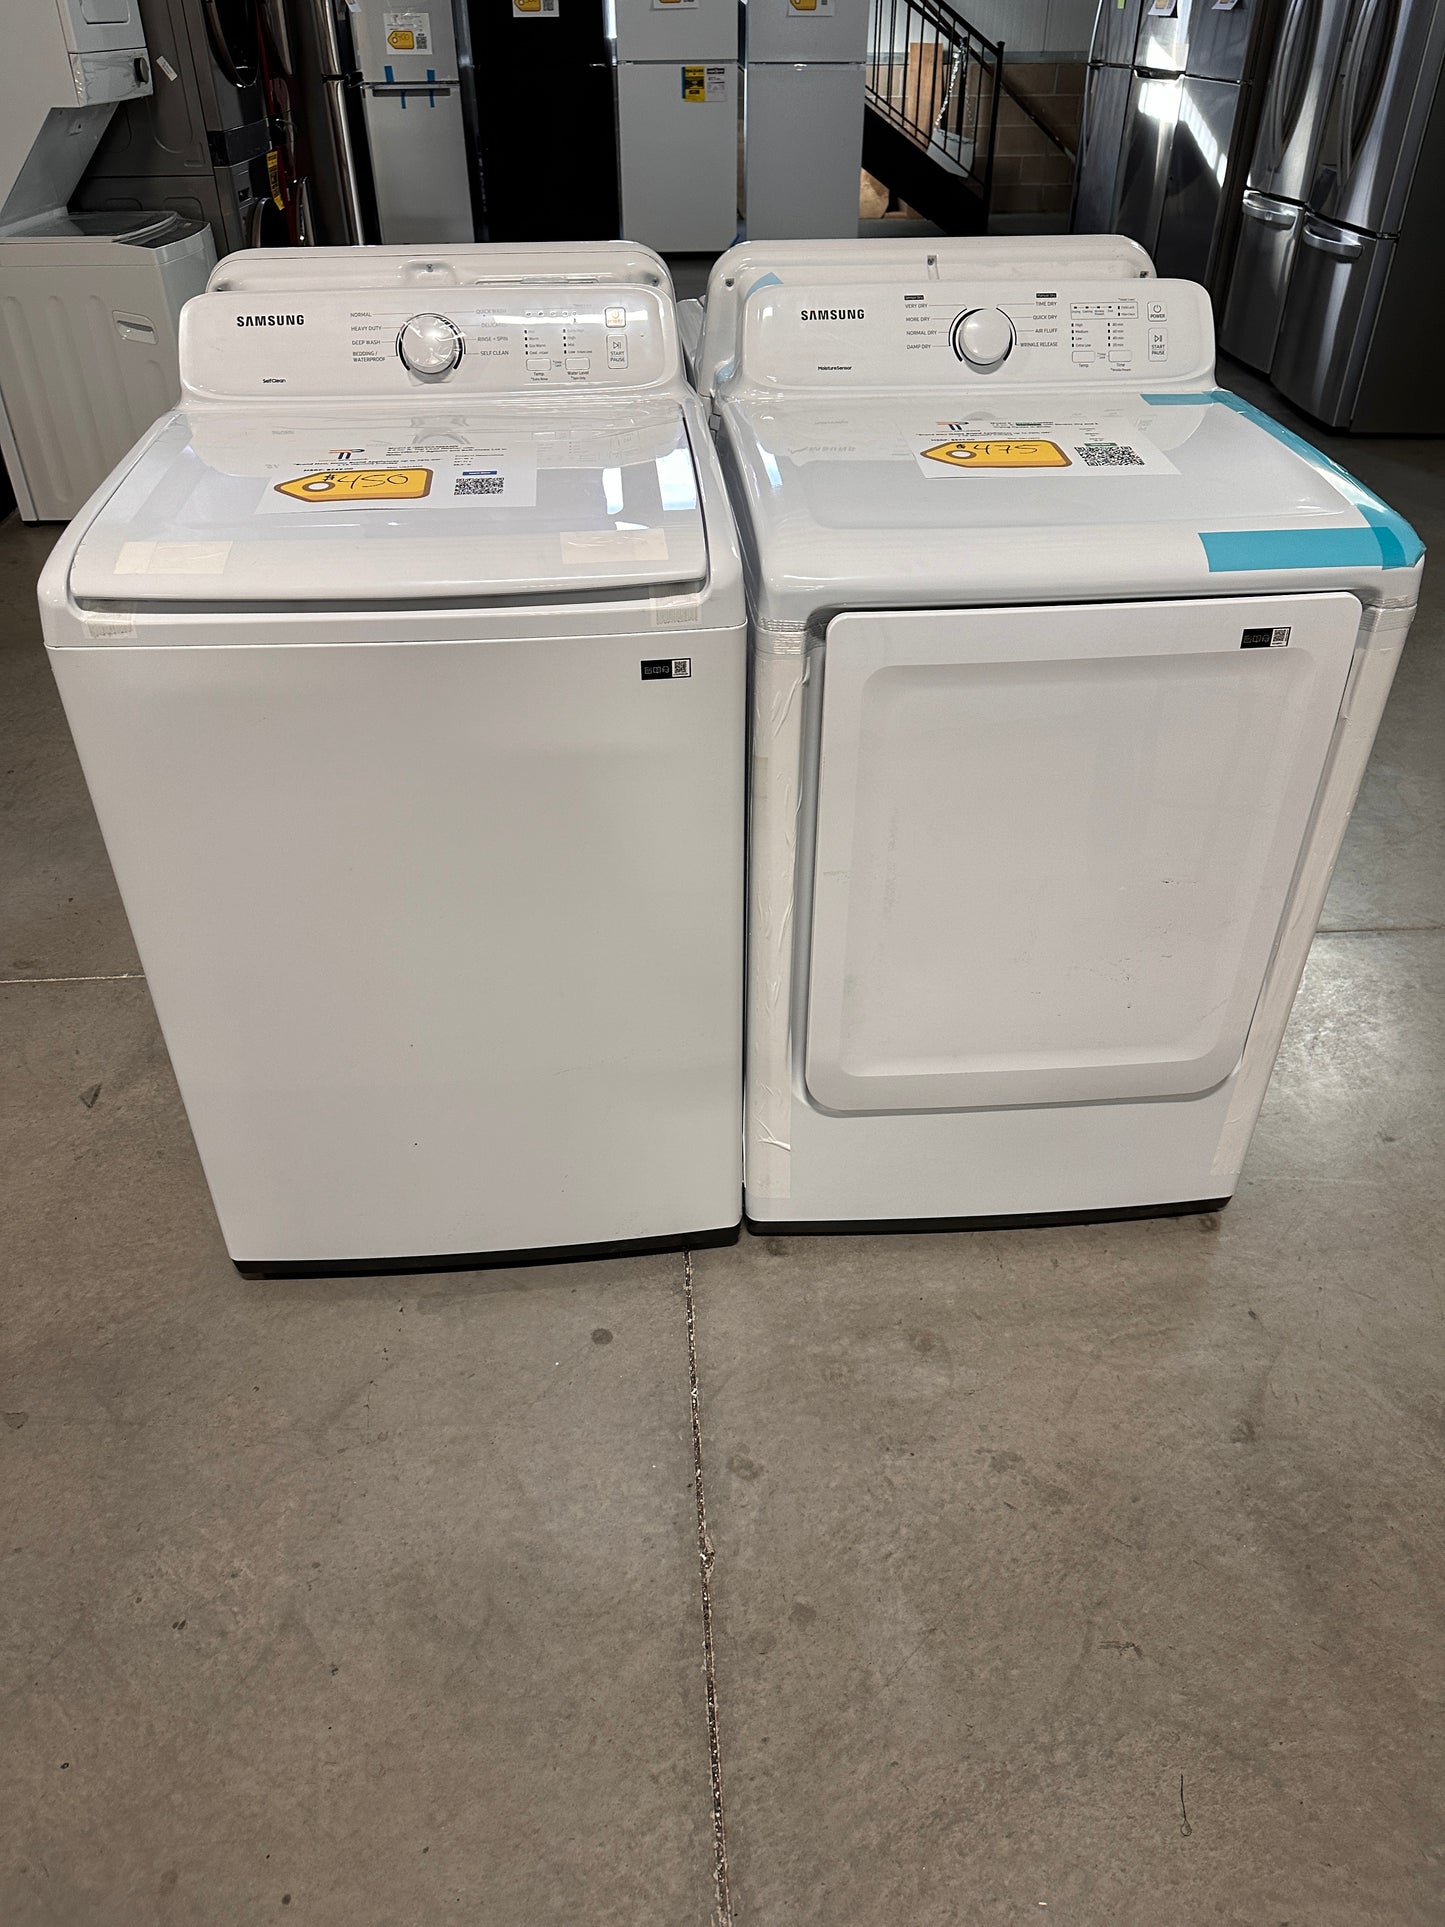 GREAT NEW TOP LOAD WASHER GAS DRYER SAMSUNG LAUNDRY SET - WAS13292 DRY12595